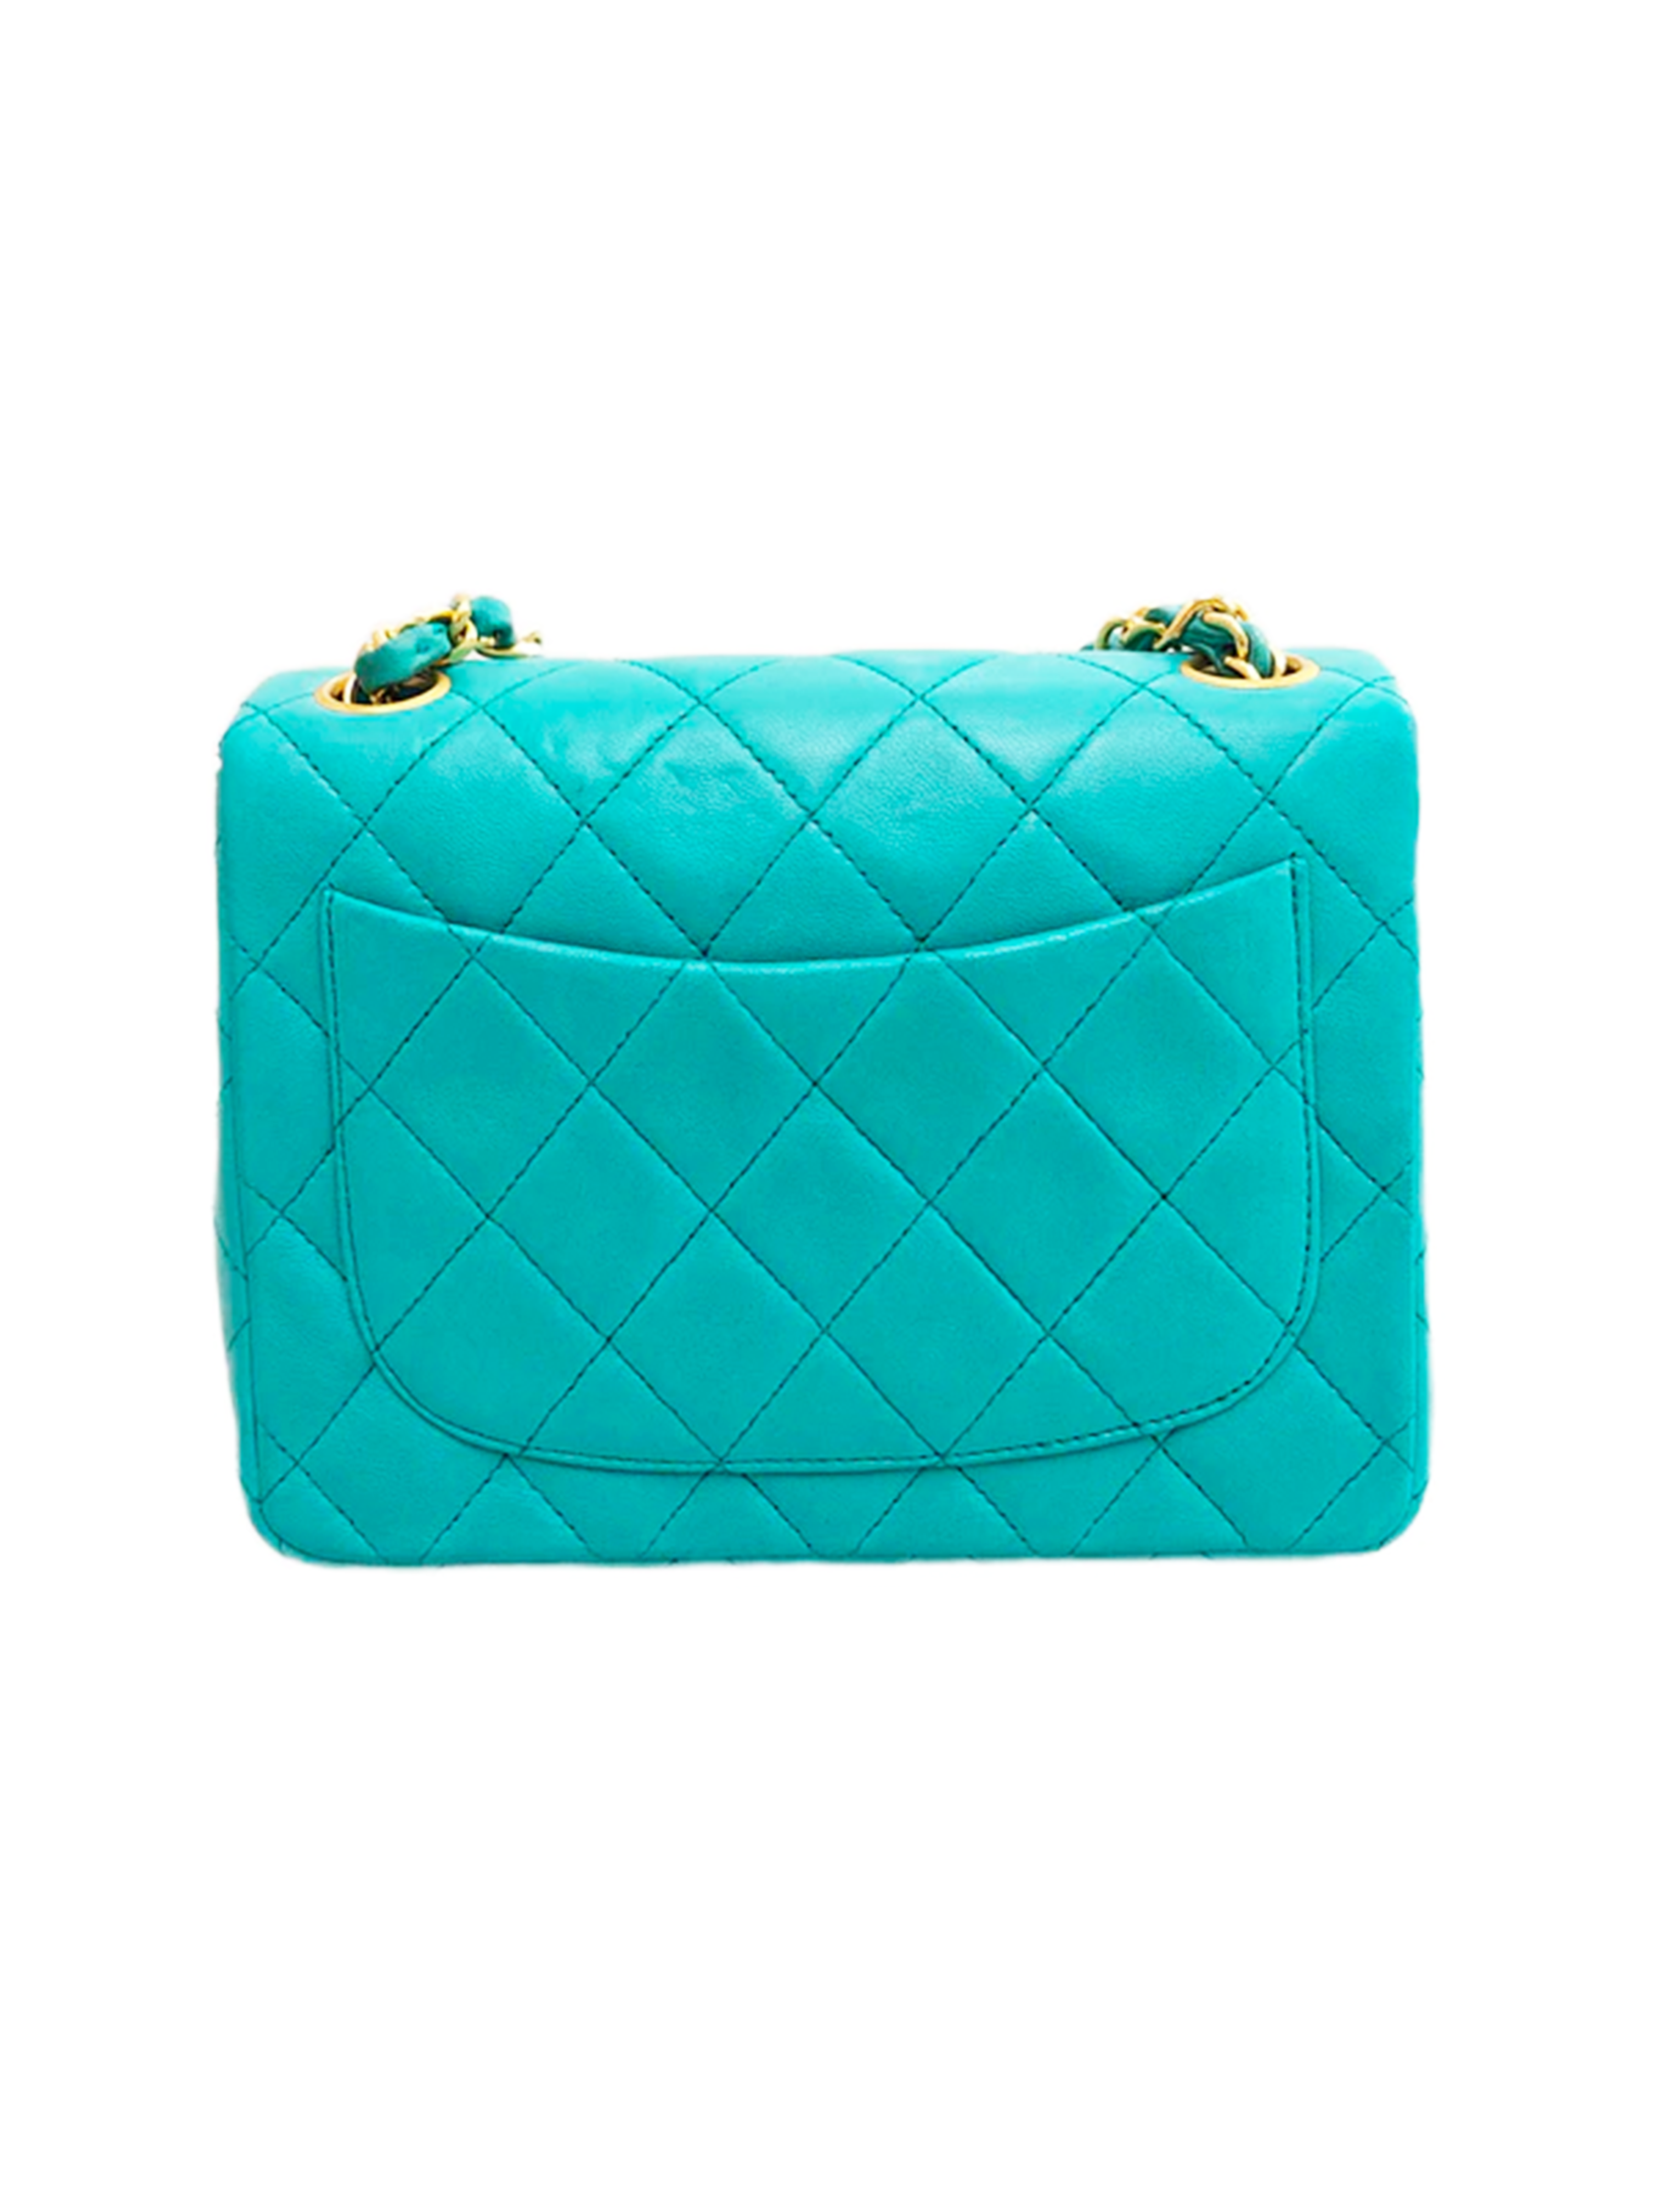 Chanel Teal 2005-2006 Square Leather Flap